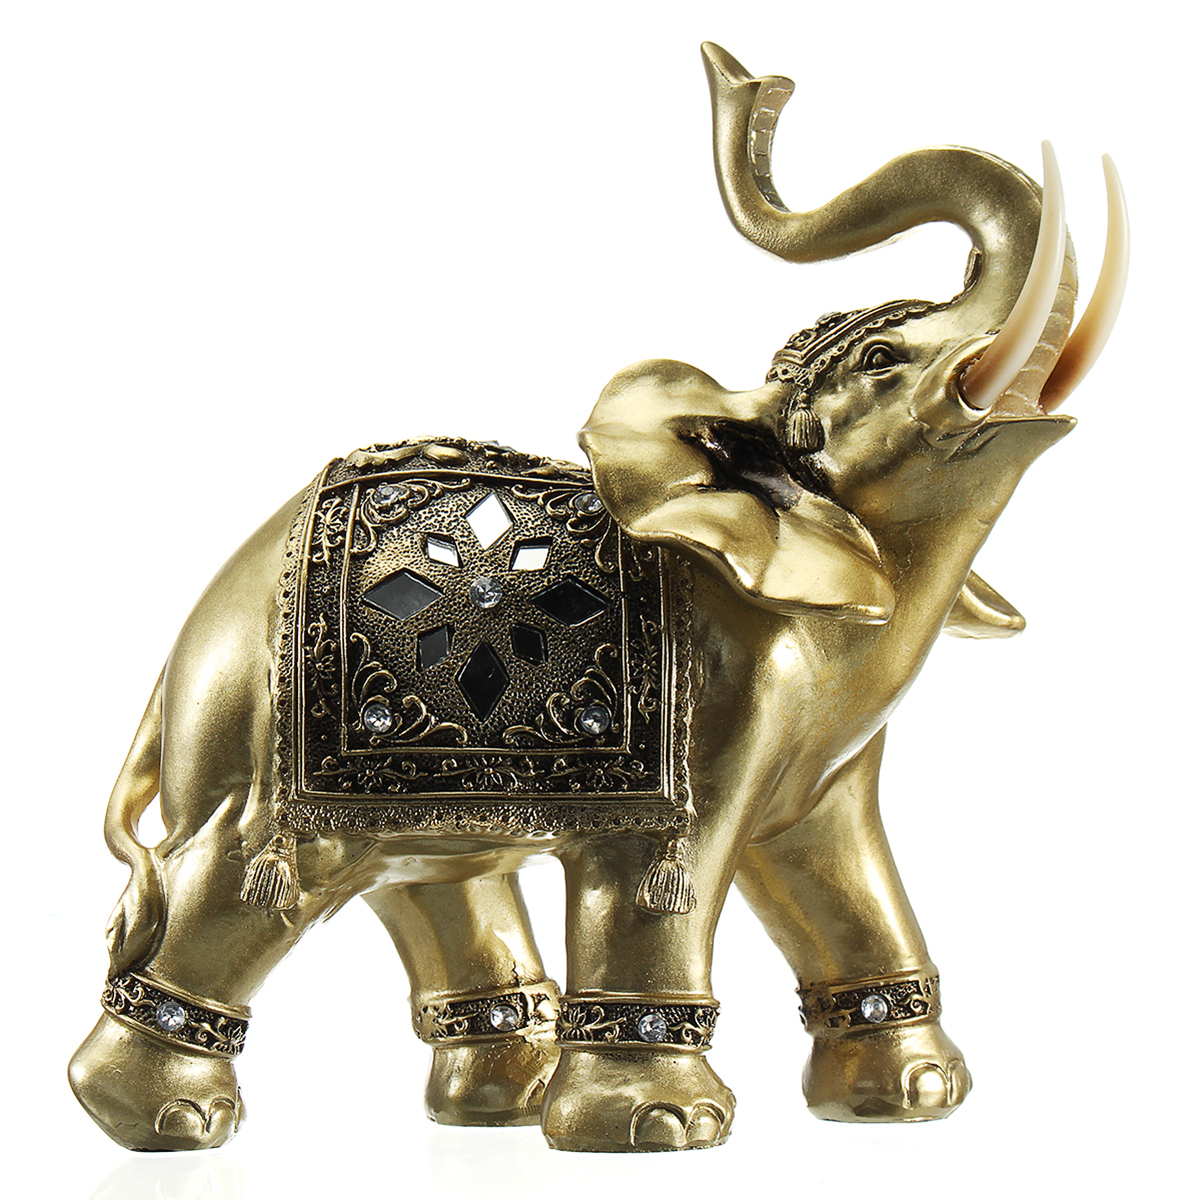 Lucky-Charm-Fengshui-Mascot-Golden-Elephant-Resin-Mini-Statue-Home-Desk-Ornaments-Gifts-Home-Decorat-1634232-8